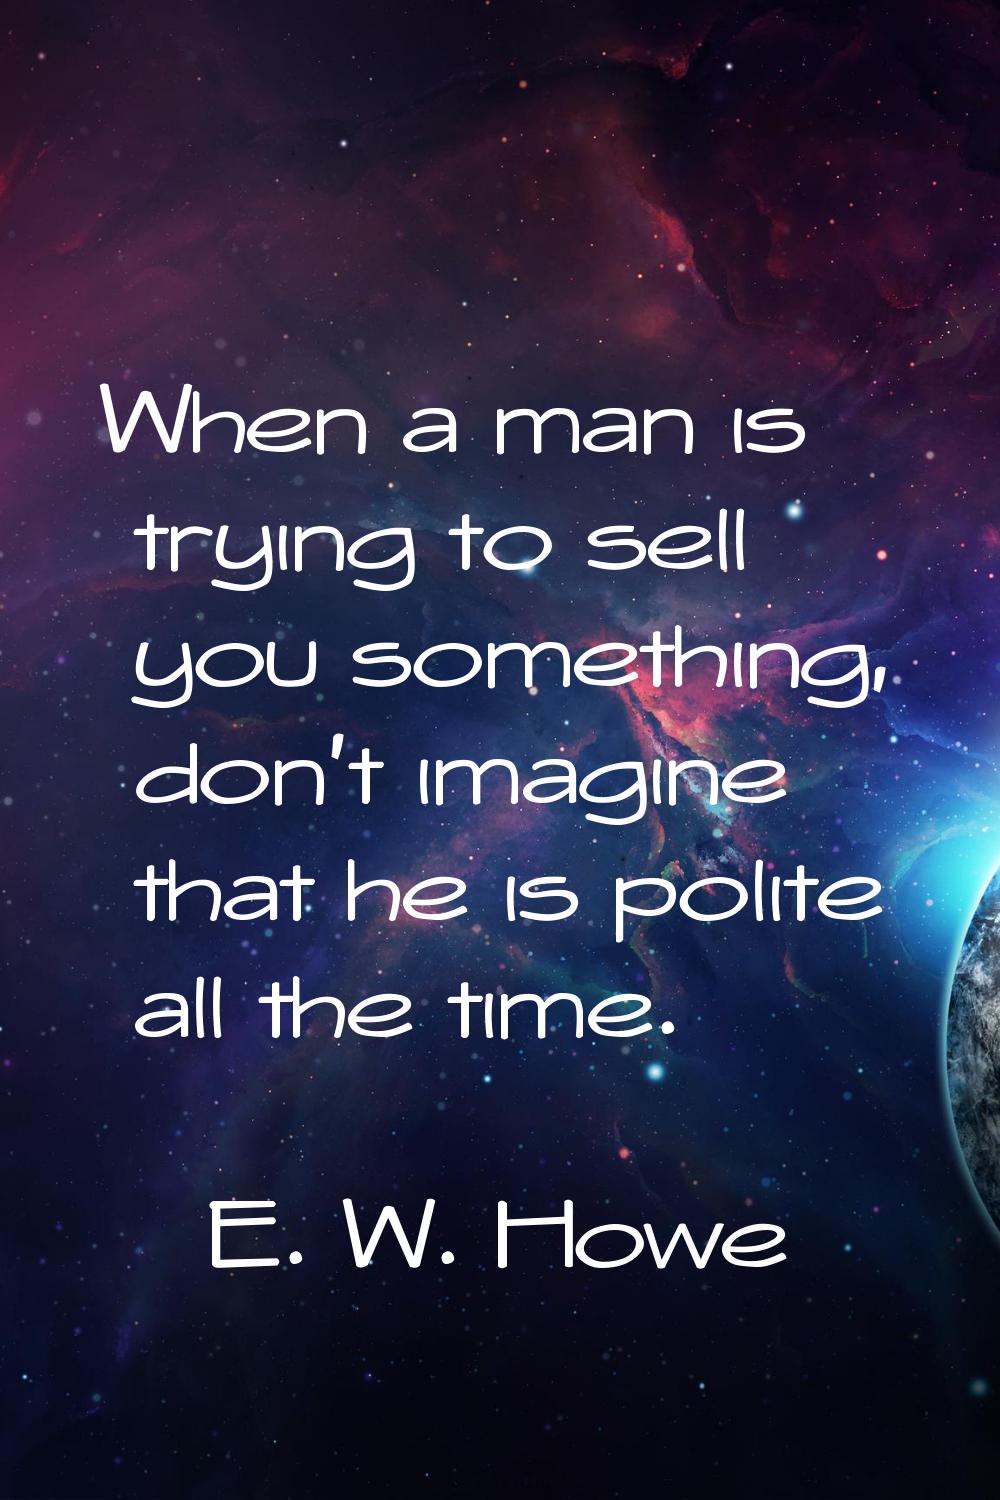 When a man is trying to sell you something, don't imagine that he is polite all the time.